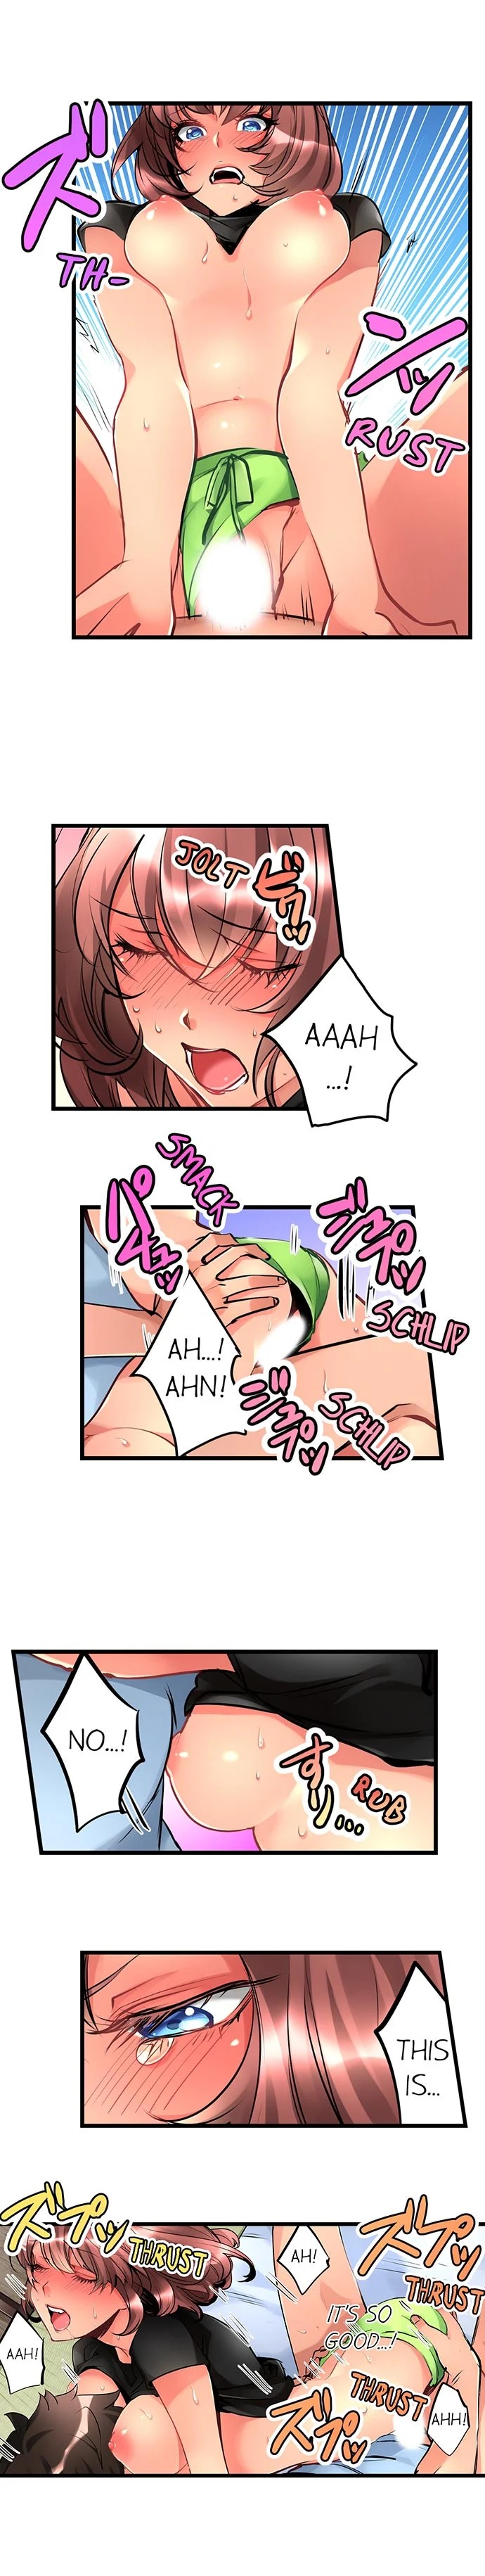 What She Fell On Was The Tip Of My Dick - Chapter 2 Page 4